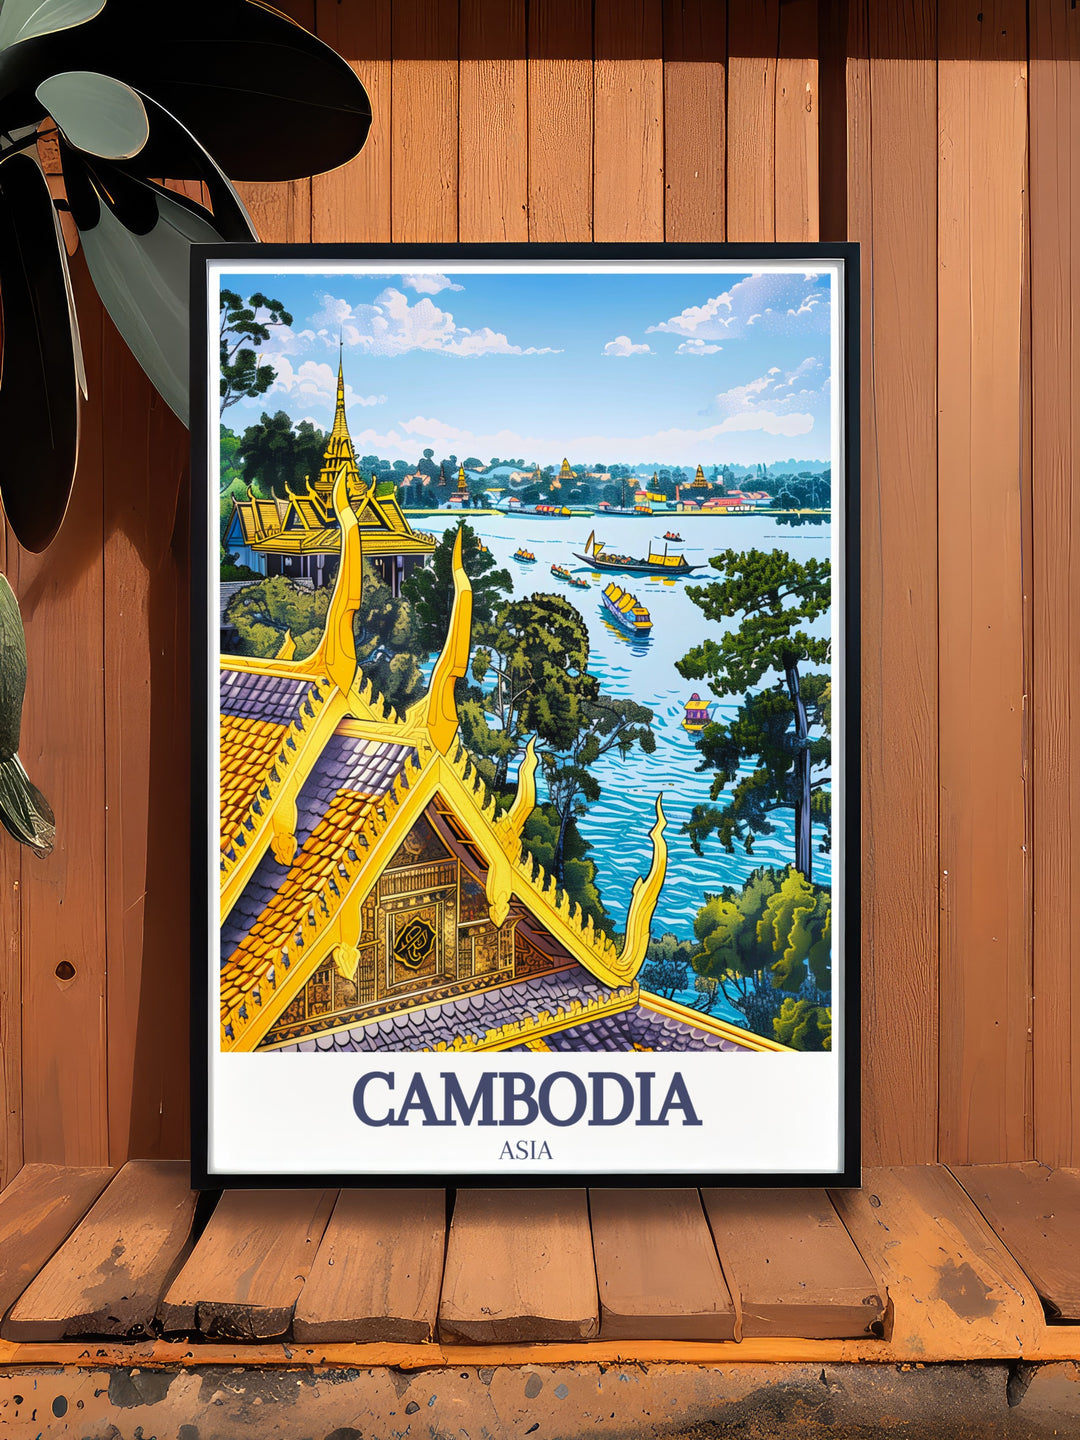 Celebrate Cambodias heritage with this Royal Palace, Phnom Penh, Tonle Sap Lake travel poster. The intricate artwork captures the elegance of these iconic sites, making it a perfect addition to any Southeast Asia inspired decor. A timeless piece for your collection.